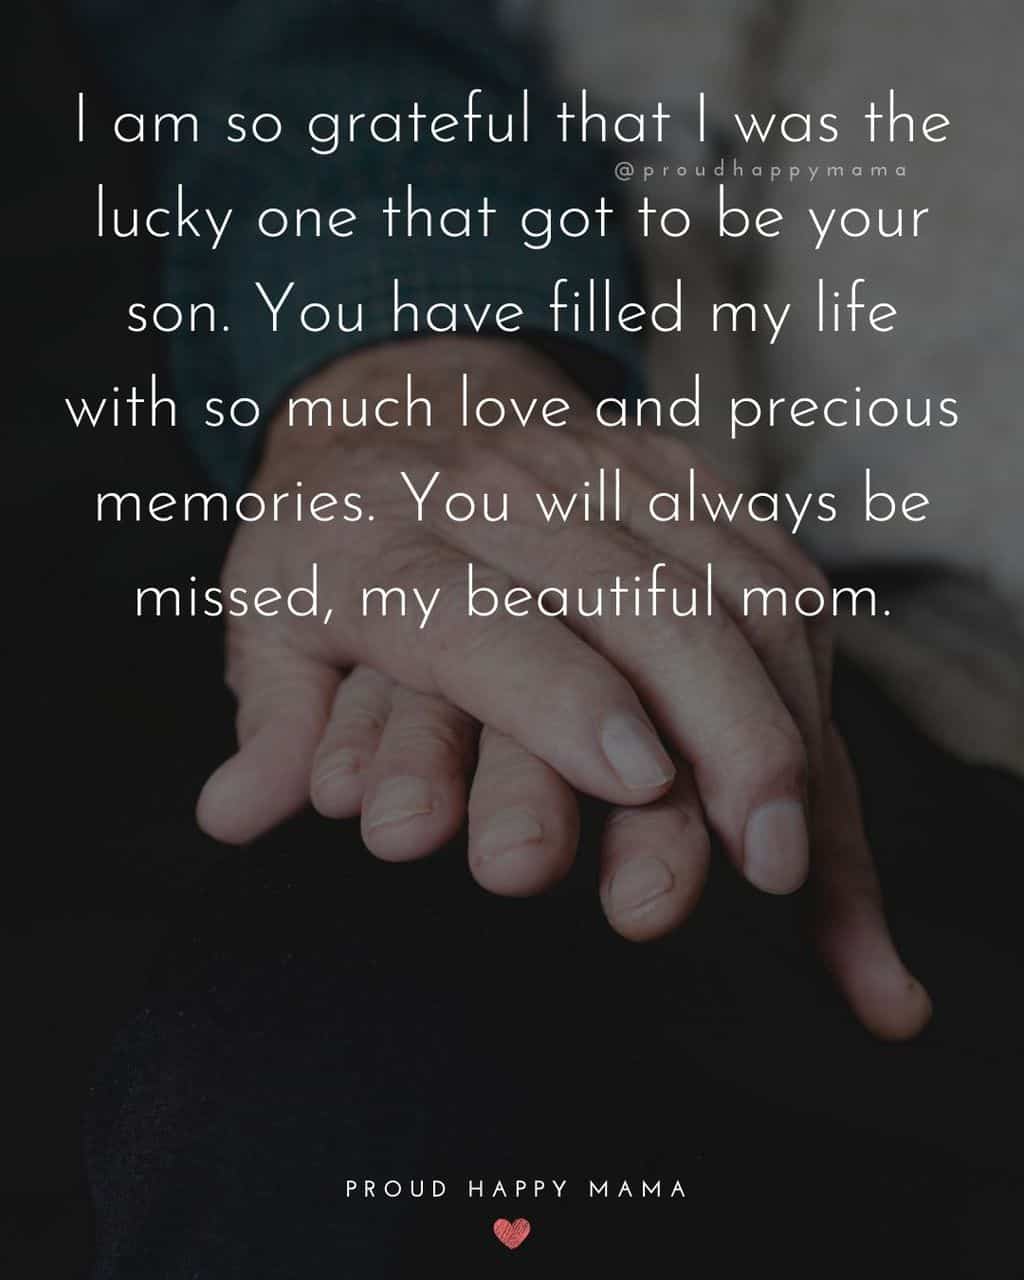 Son holding elderly mother's hand with text overlay, ‘I am so grateful that I was the lucky one that got to be your son. You have filled my life with so much love and precious memories. You will always be missed, my beautiful mom.’